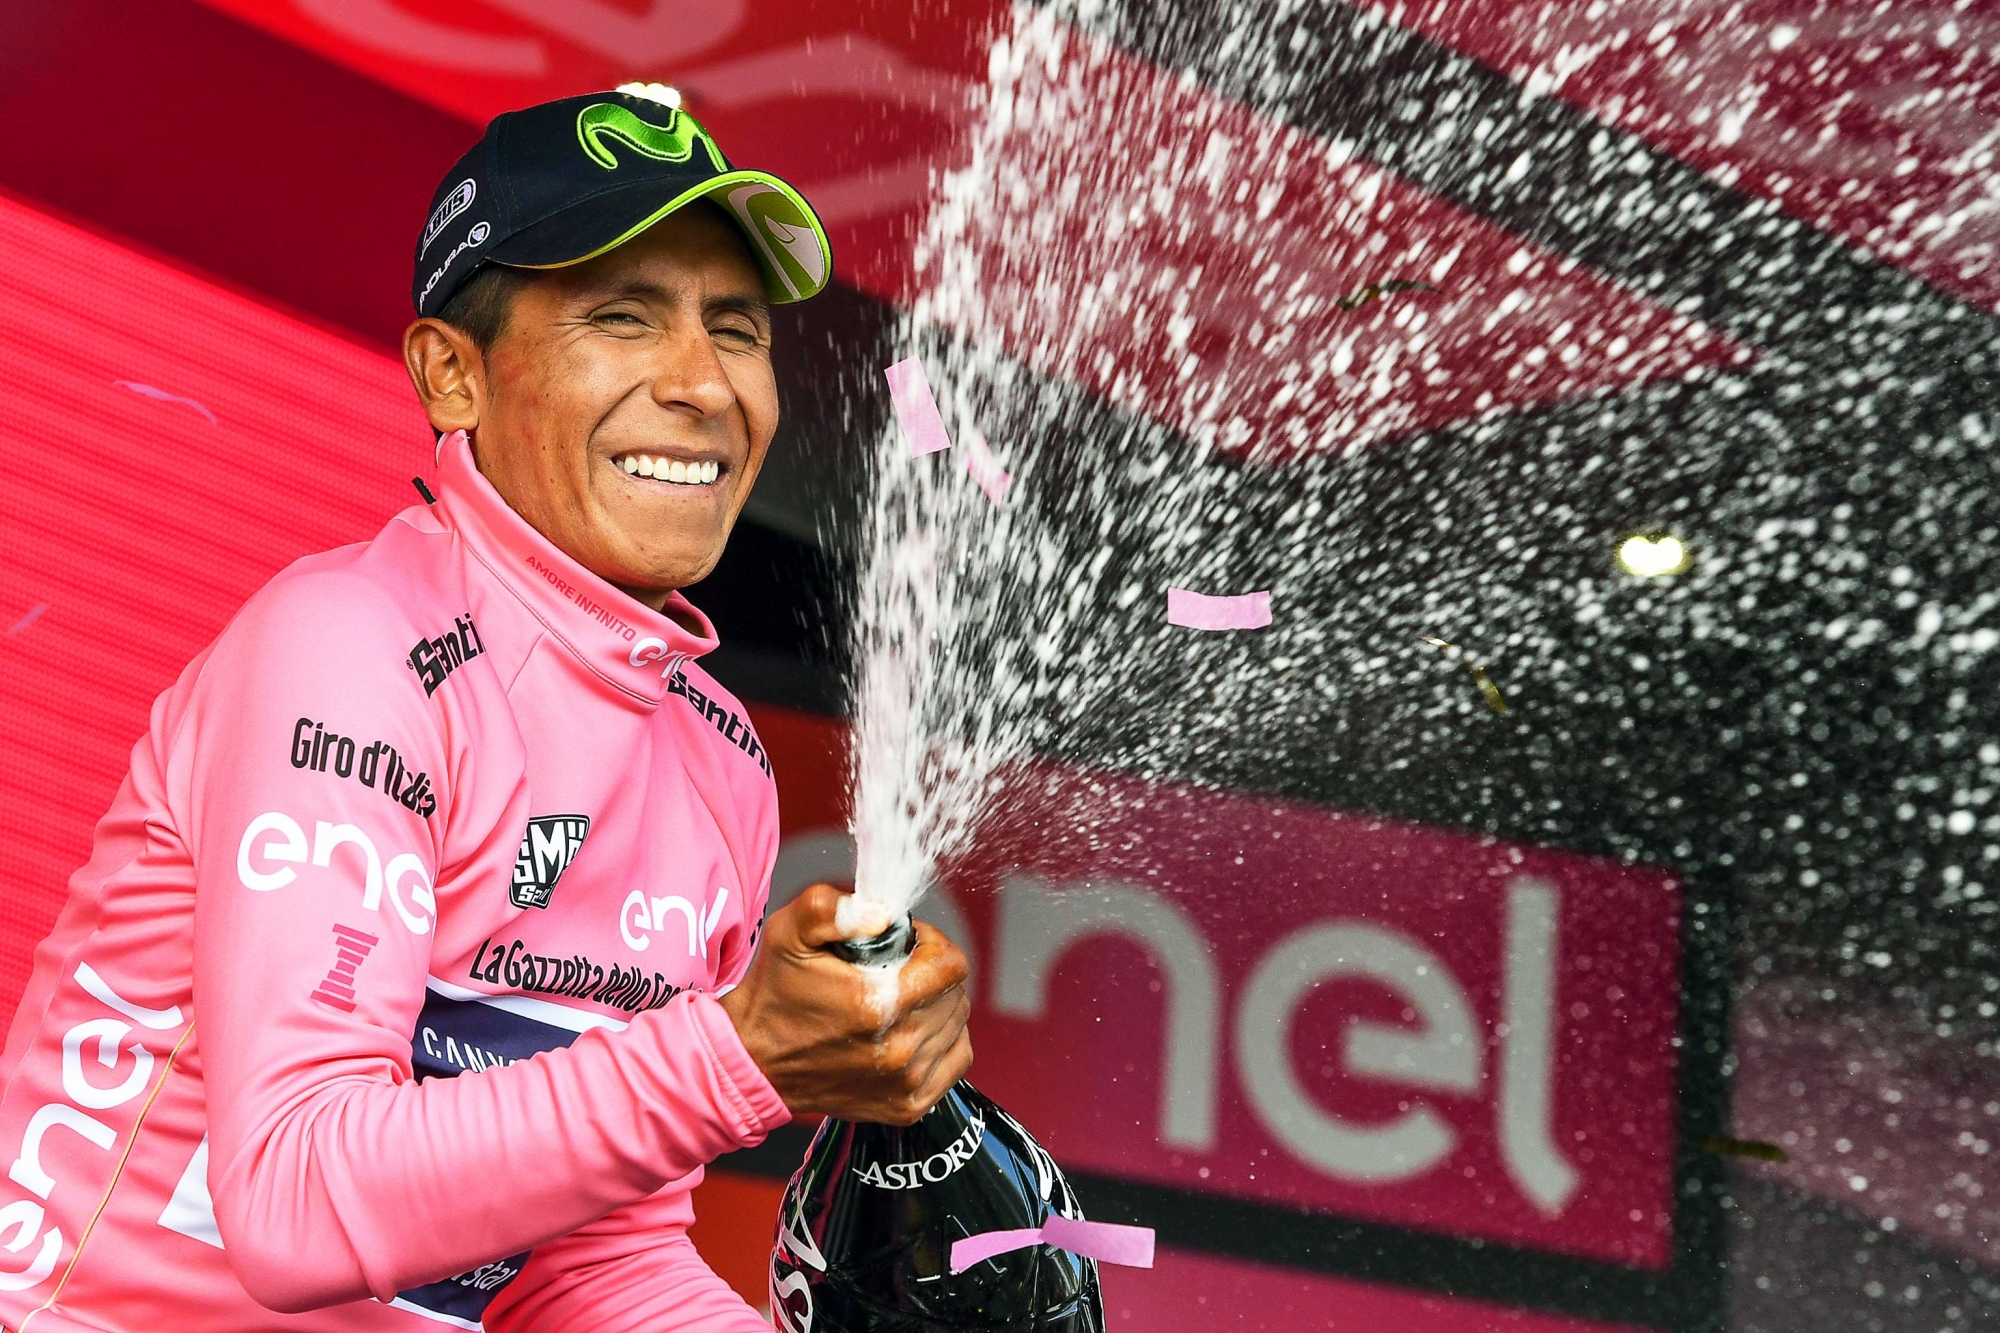 epa05964455 Colombian rider Nairo Quintana of the Movistar Team celebrates on the podium wearing the overall leader's pink jersey after winning the ninth stage of the 100th Giro d'Italia cycling race over 149km from Montenero di Bisacchia to Blockhaus, Italy, 14 May 2017.  EPA/ALESSANDRO DI MEO ITALY CYCLING GIRO D'ITALIA